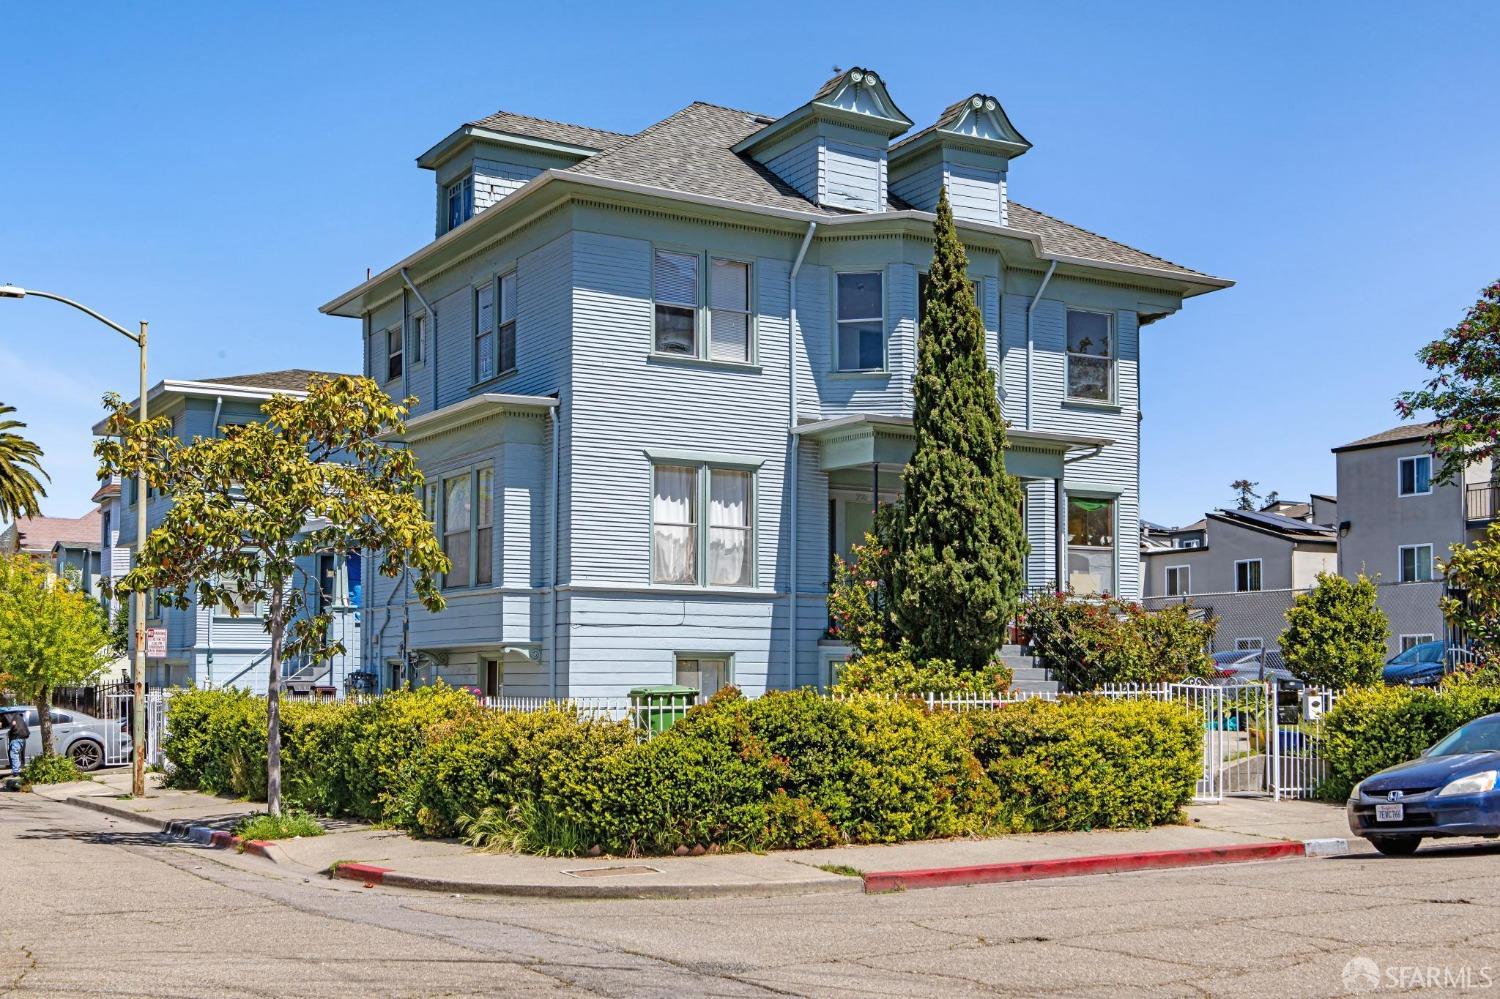 Photo of 1608 Myrtle St in Oakland, CA